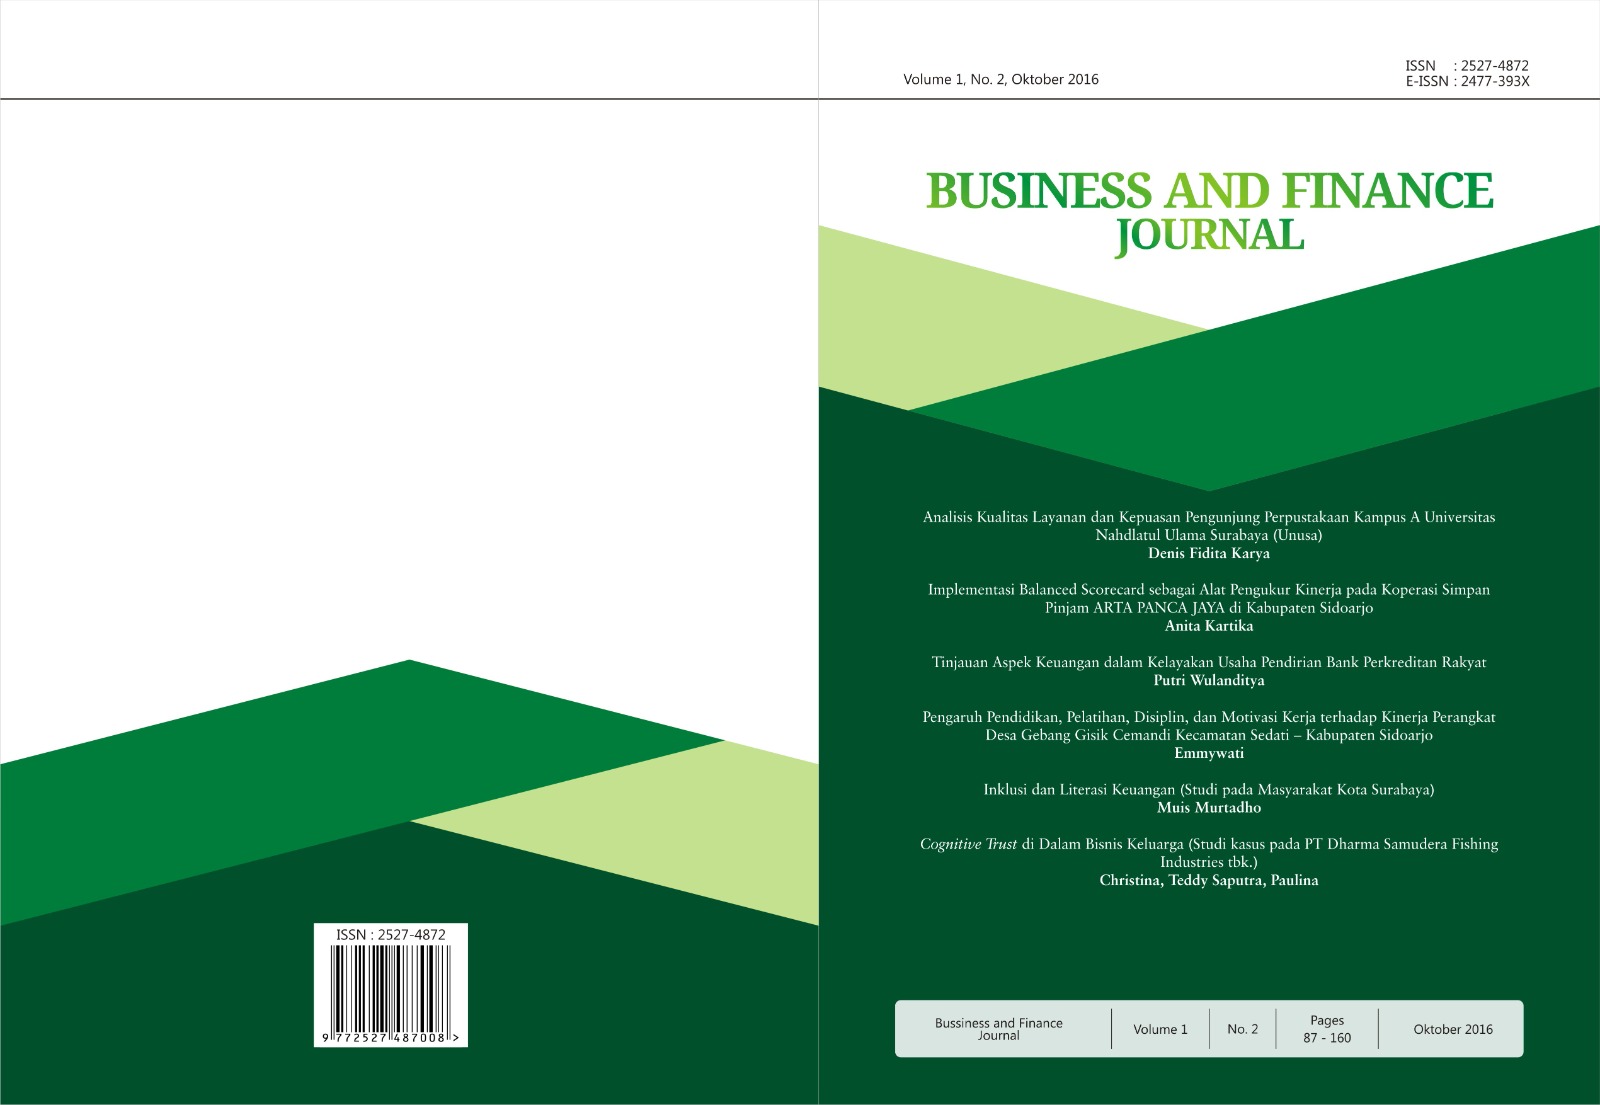 					View Vol. 1 No. 1 (2016): Business and Finance Journal
				